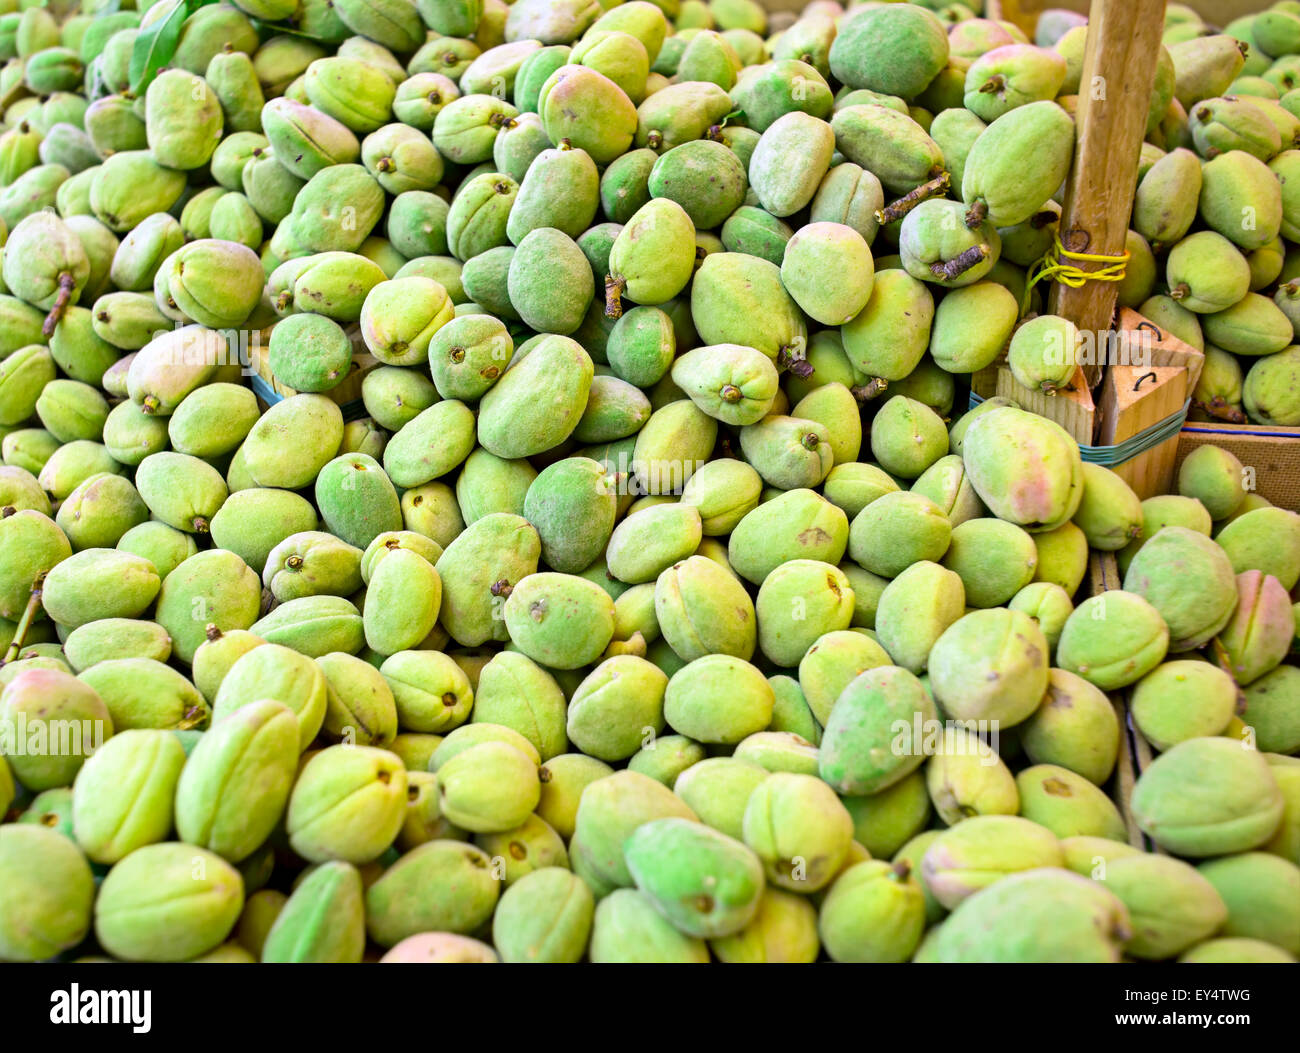 Fresh green almonds with shell in a market. Stock Photo